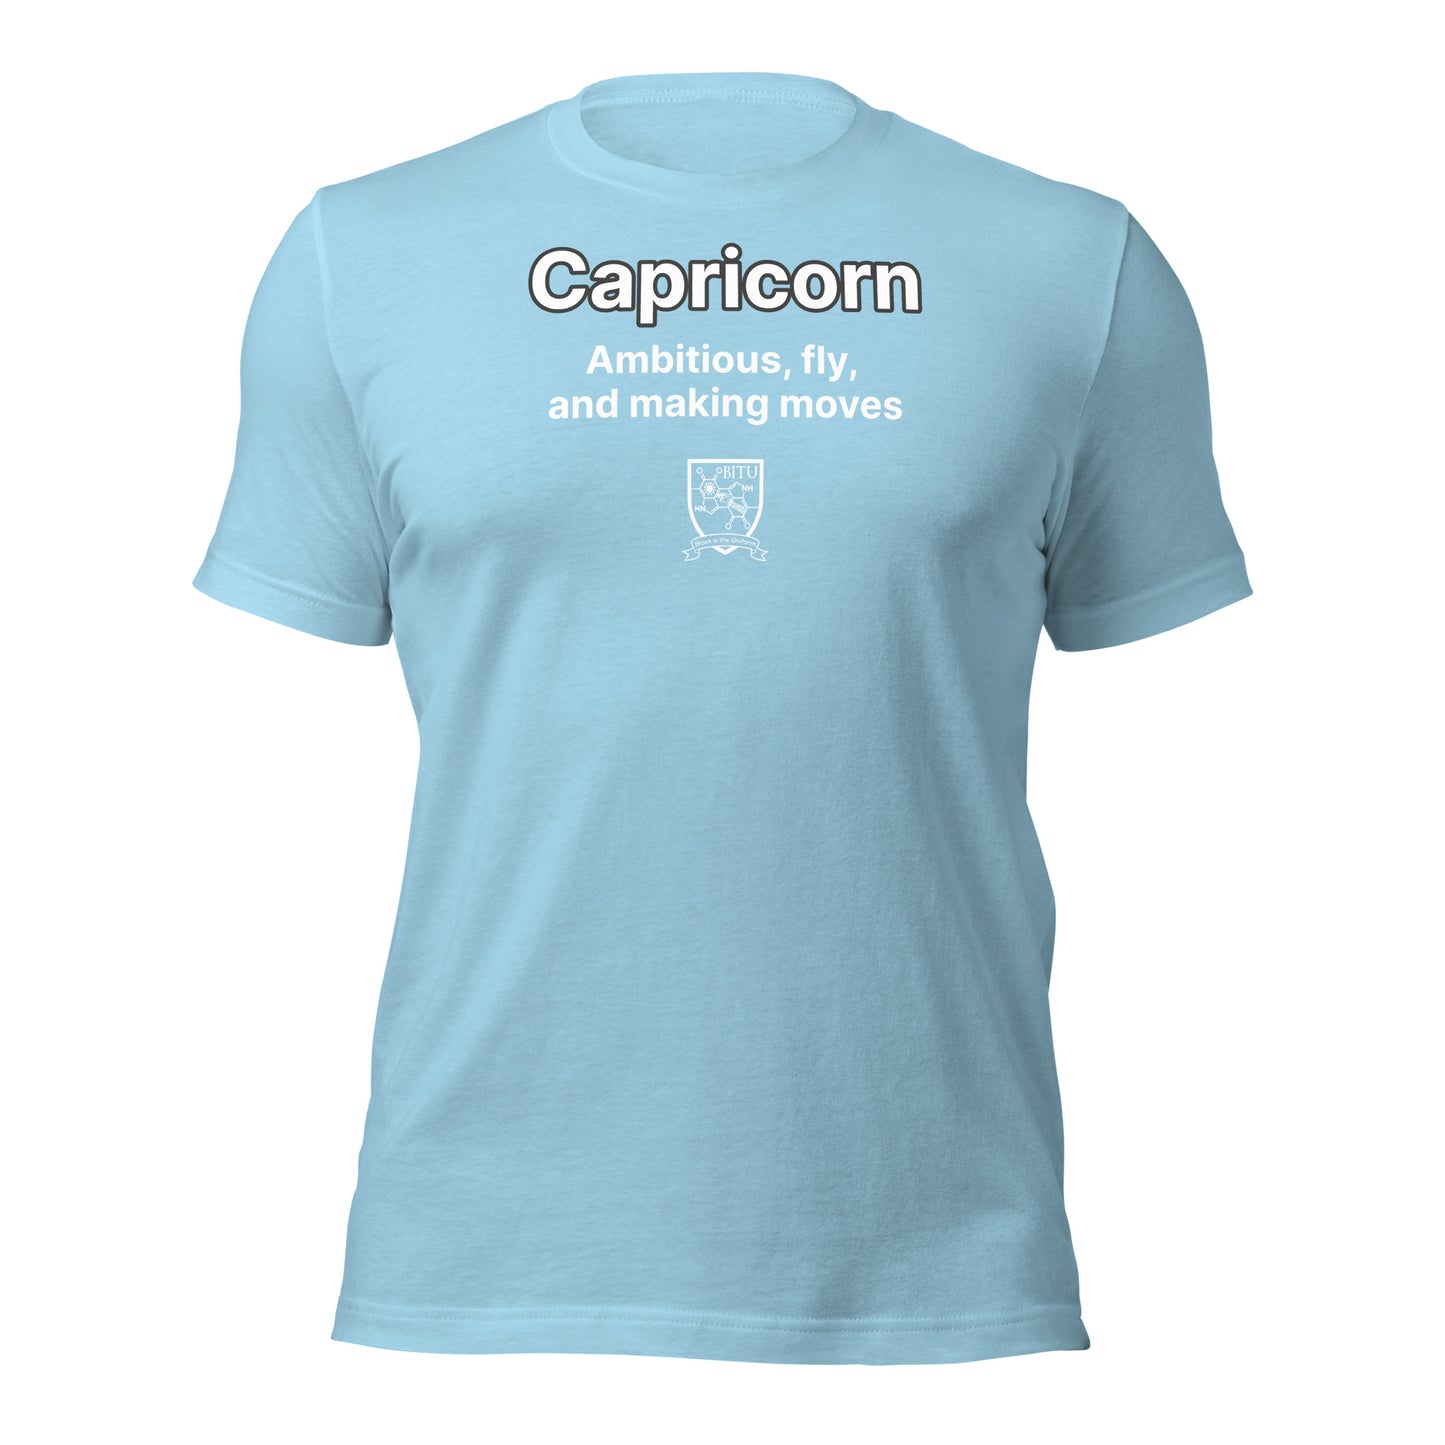 Capricorn - Ambitious, fly, and making moves